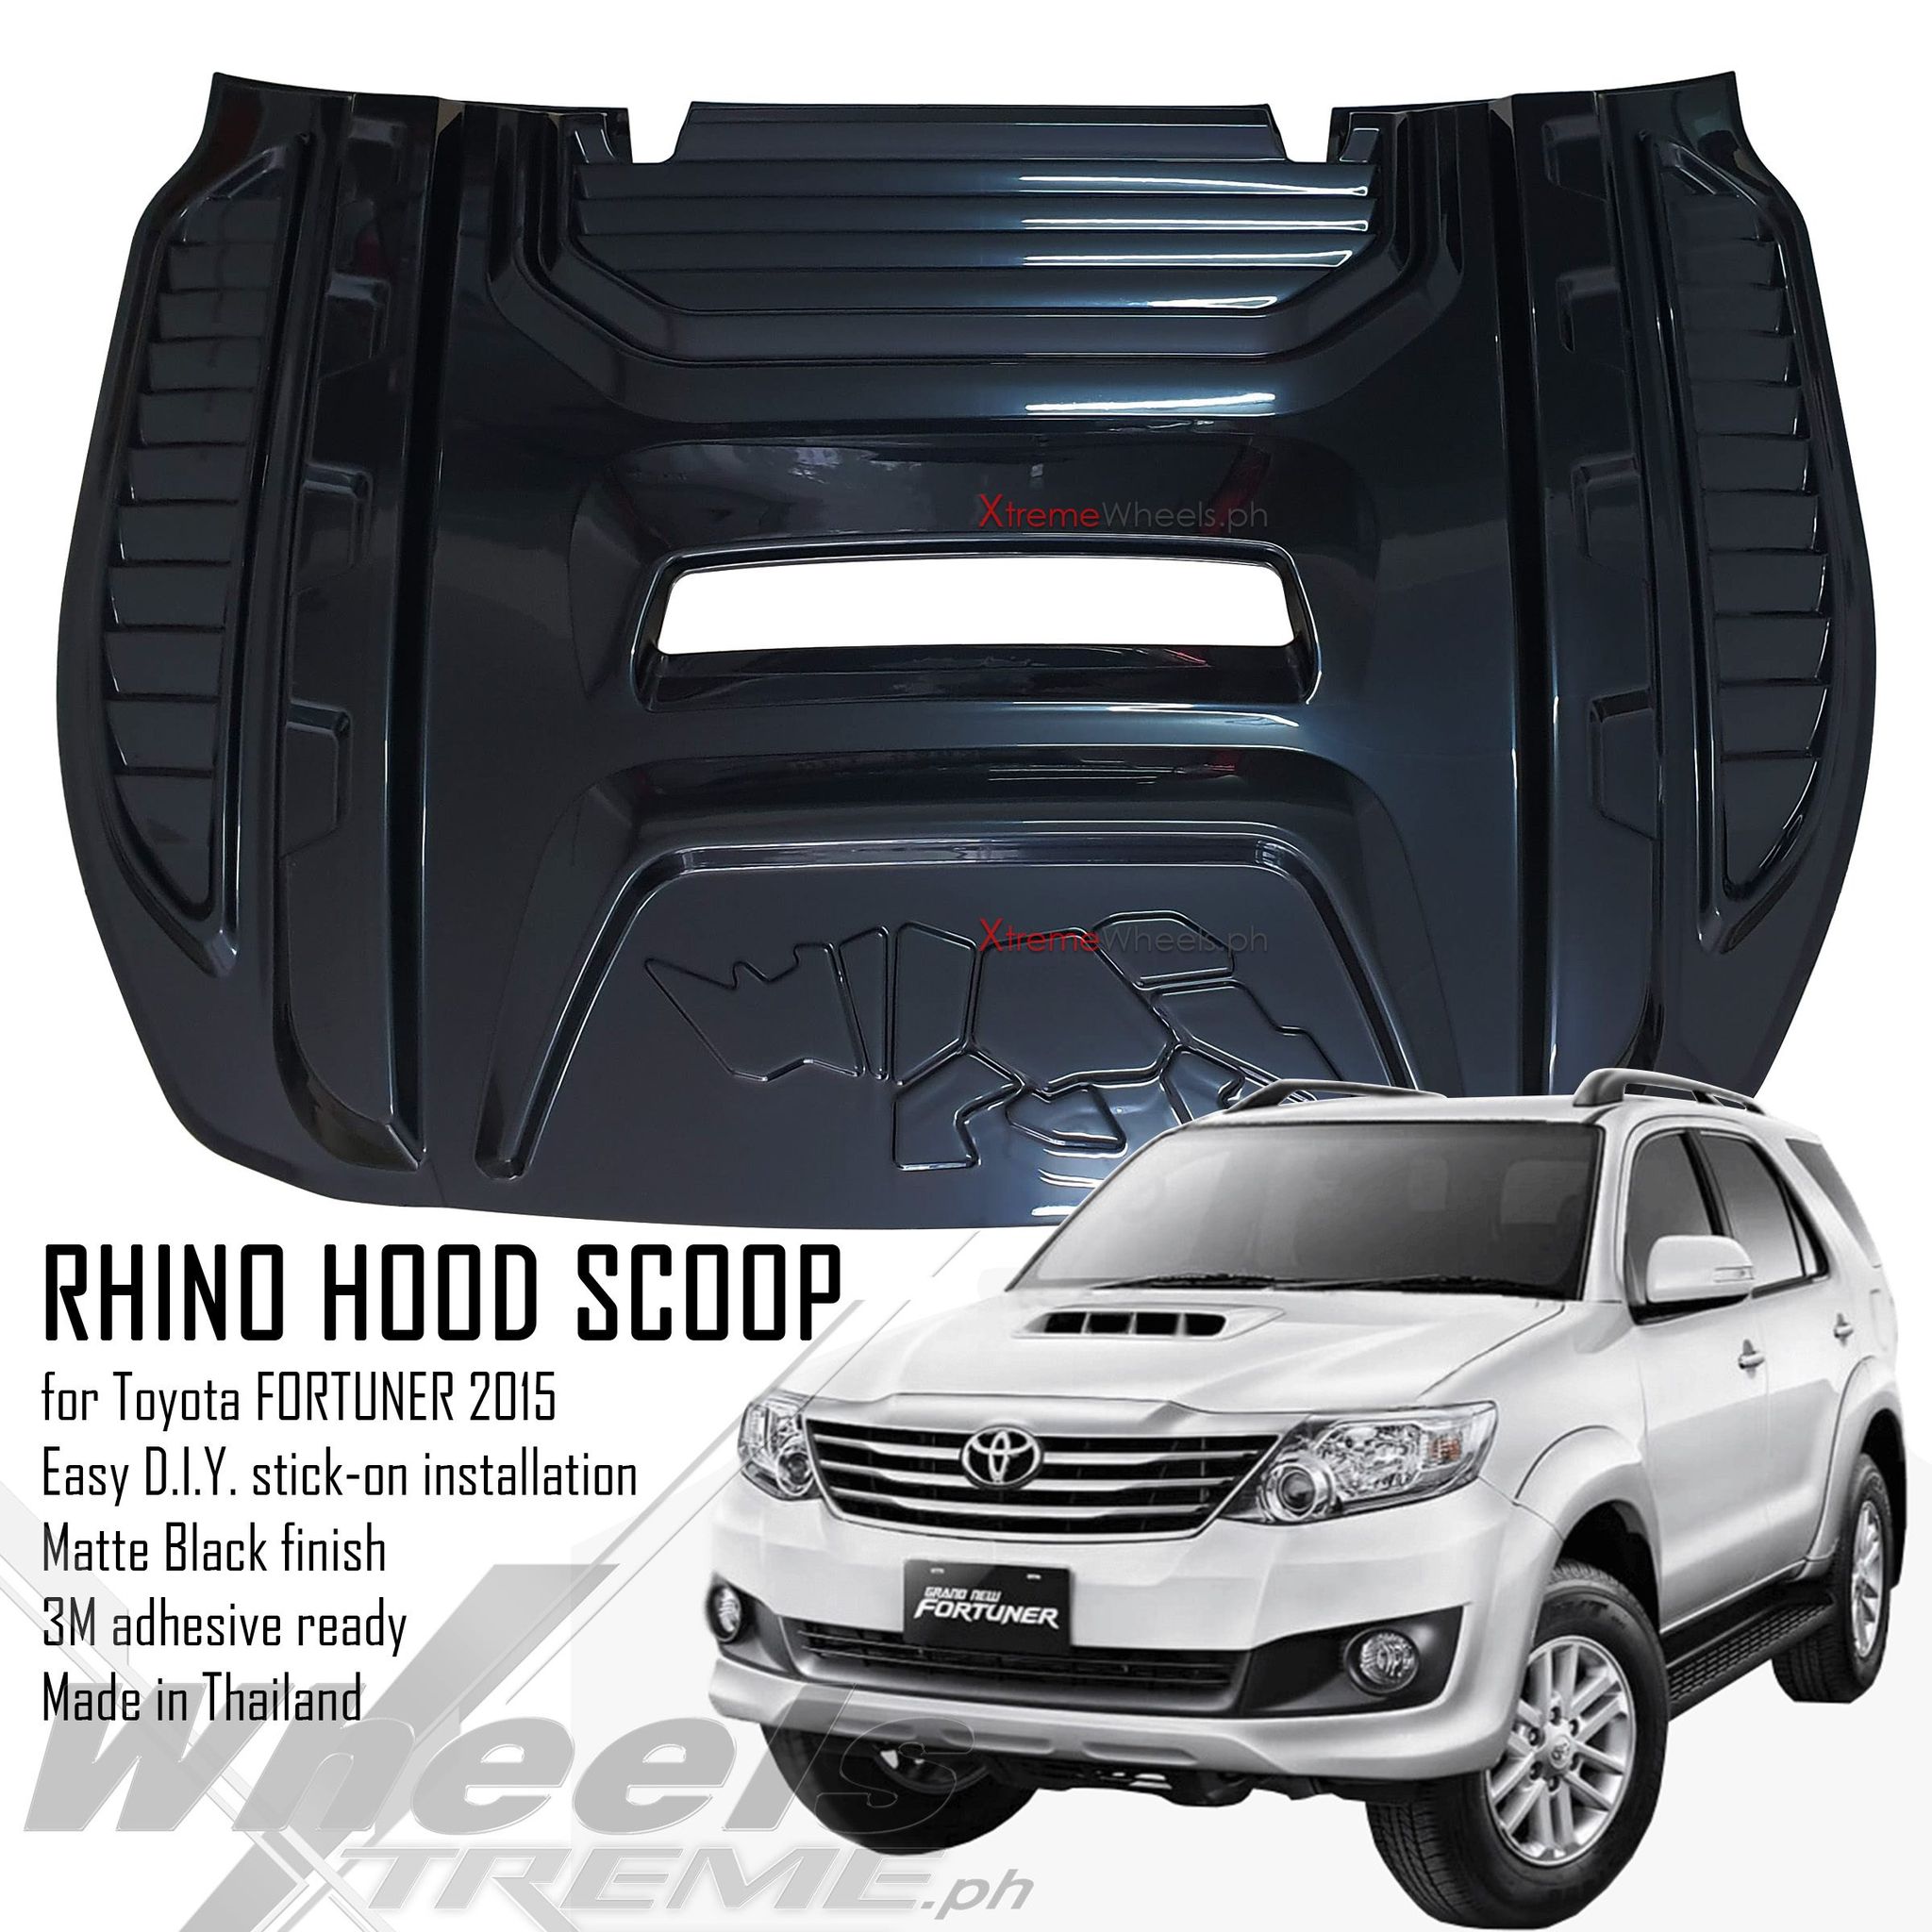 SILVER GOLD 5A7 HOOD SCOOP COVER 52 X 35 FOR TOYOTA HILUX FORTUNER 2004-2014 